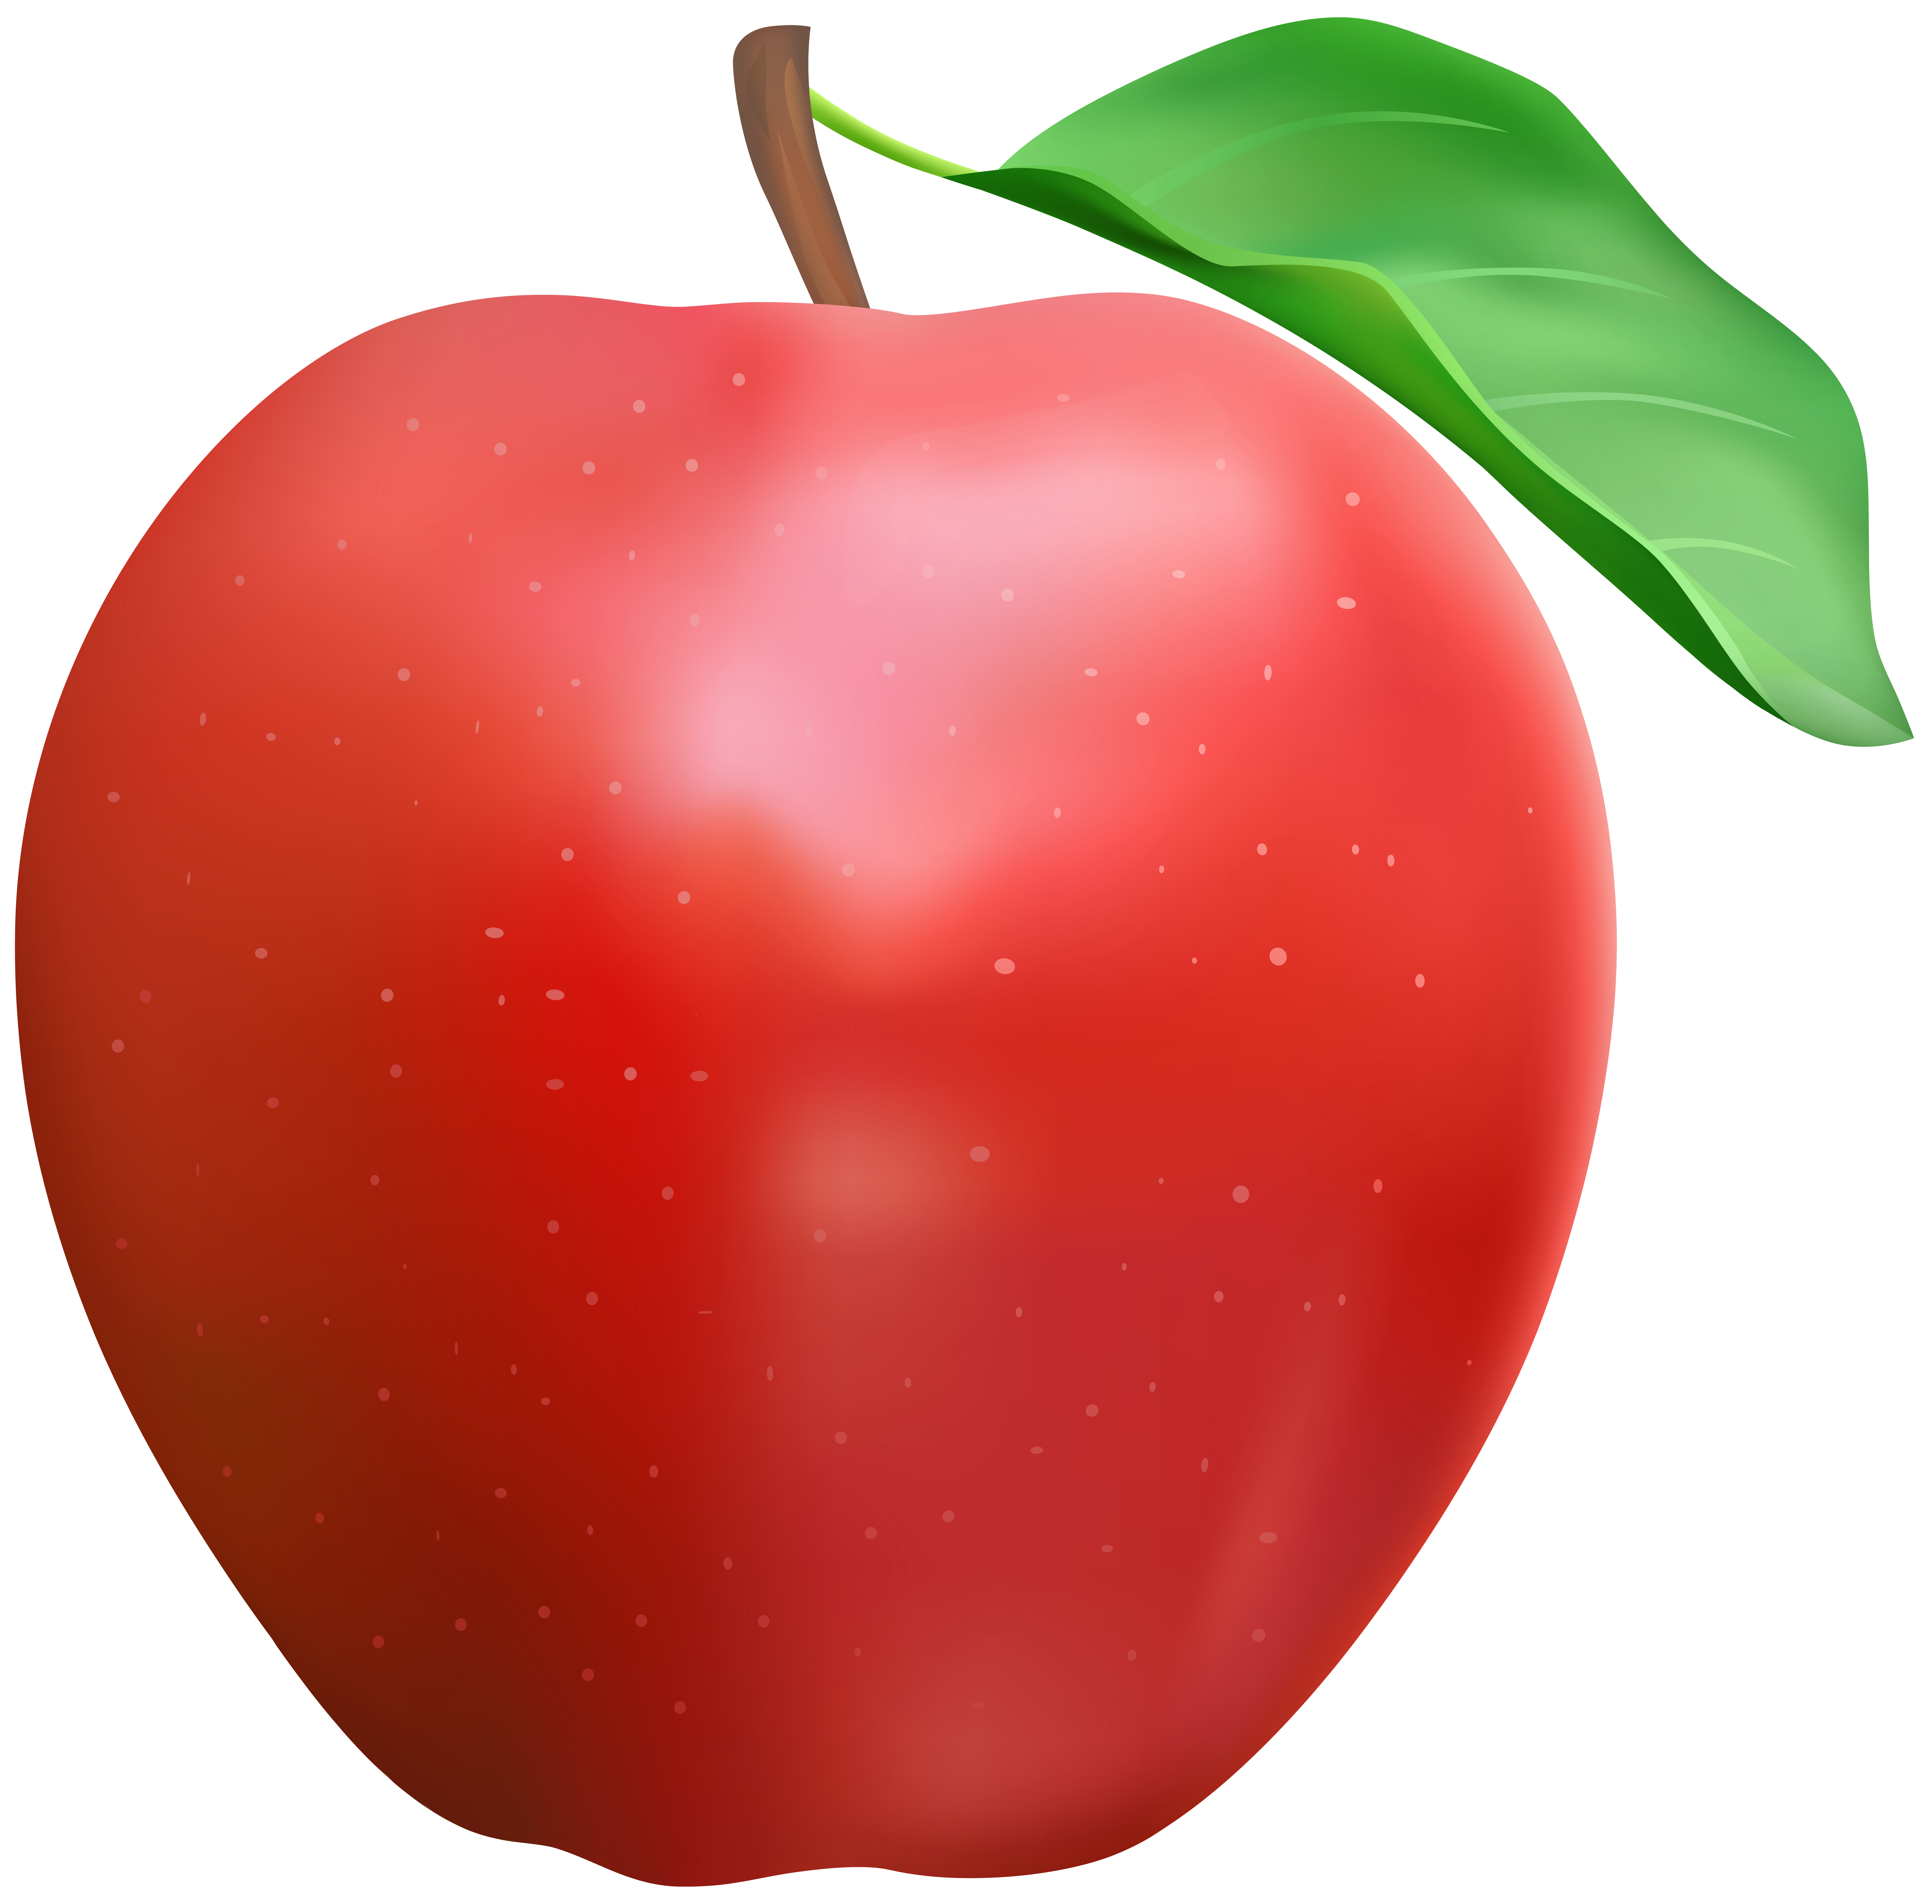 red apple clipart